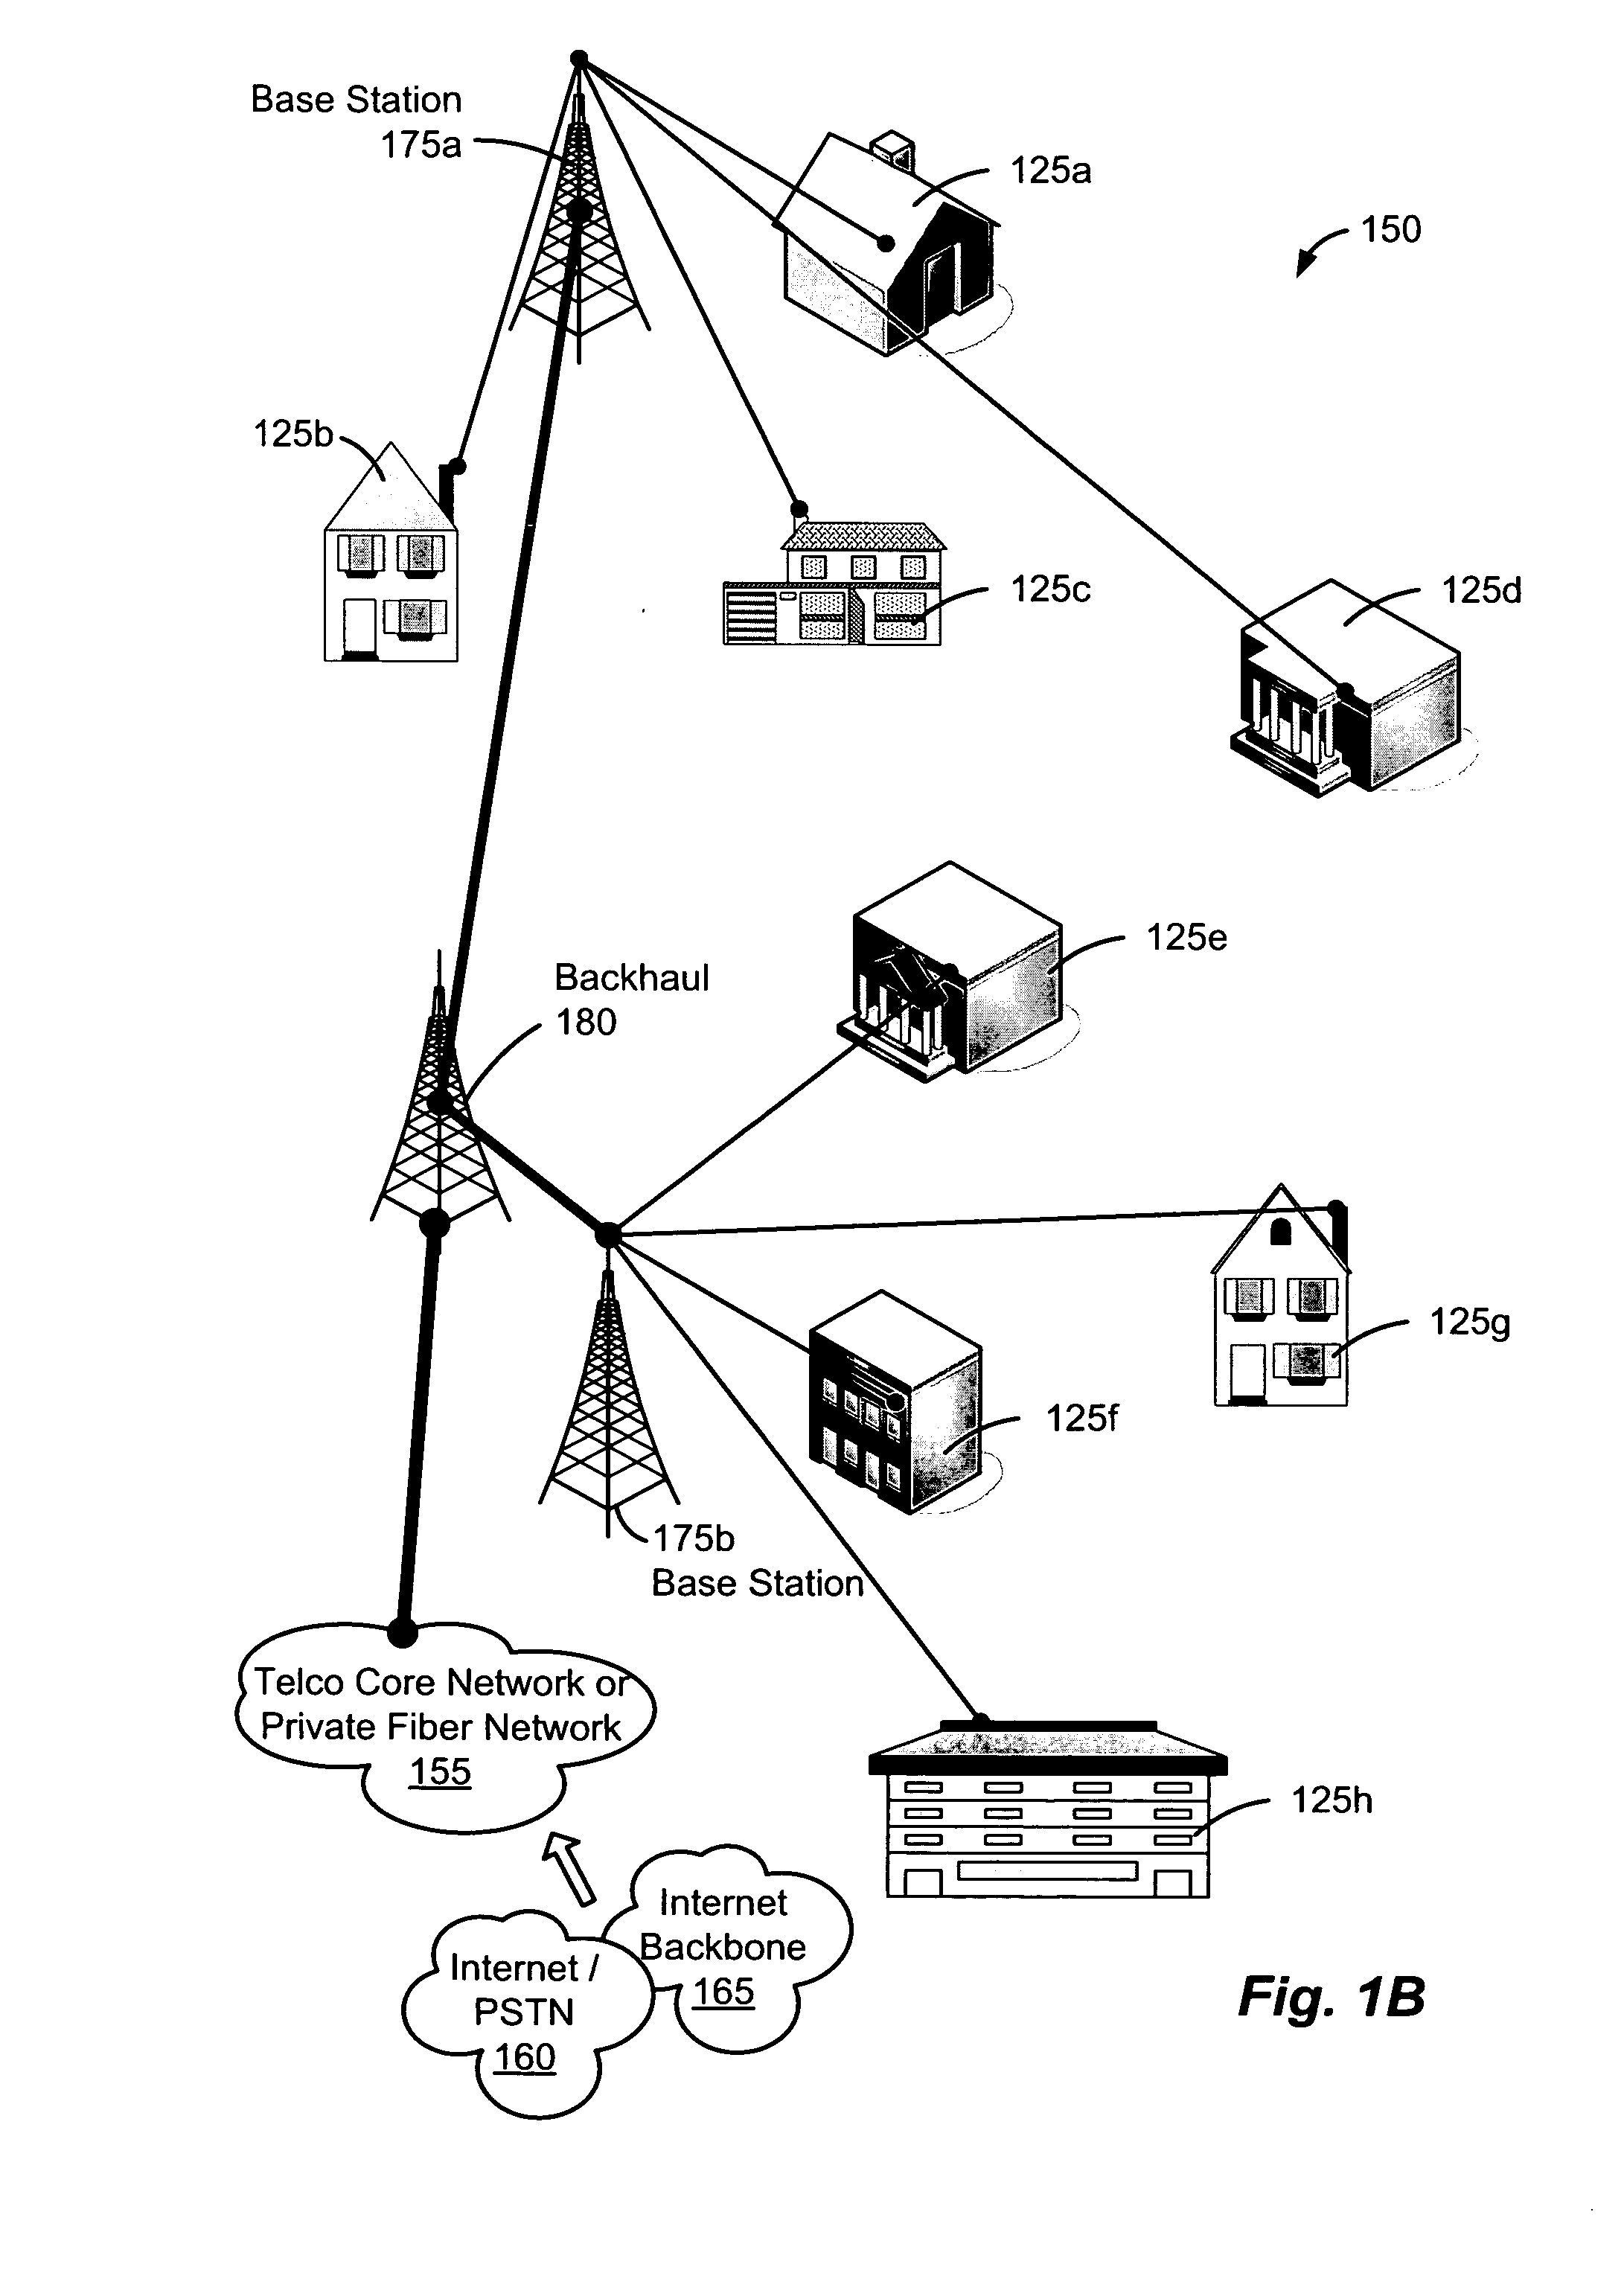 Method and system for providing broadband access, HDTV, and broadband-enabled services